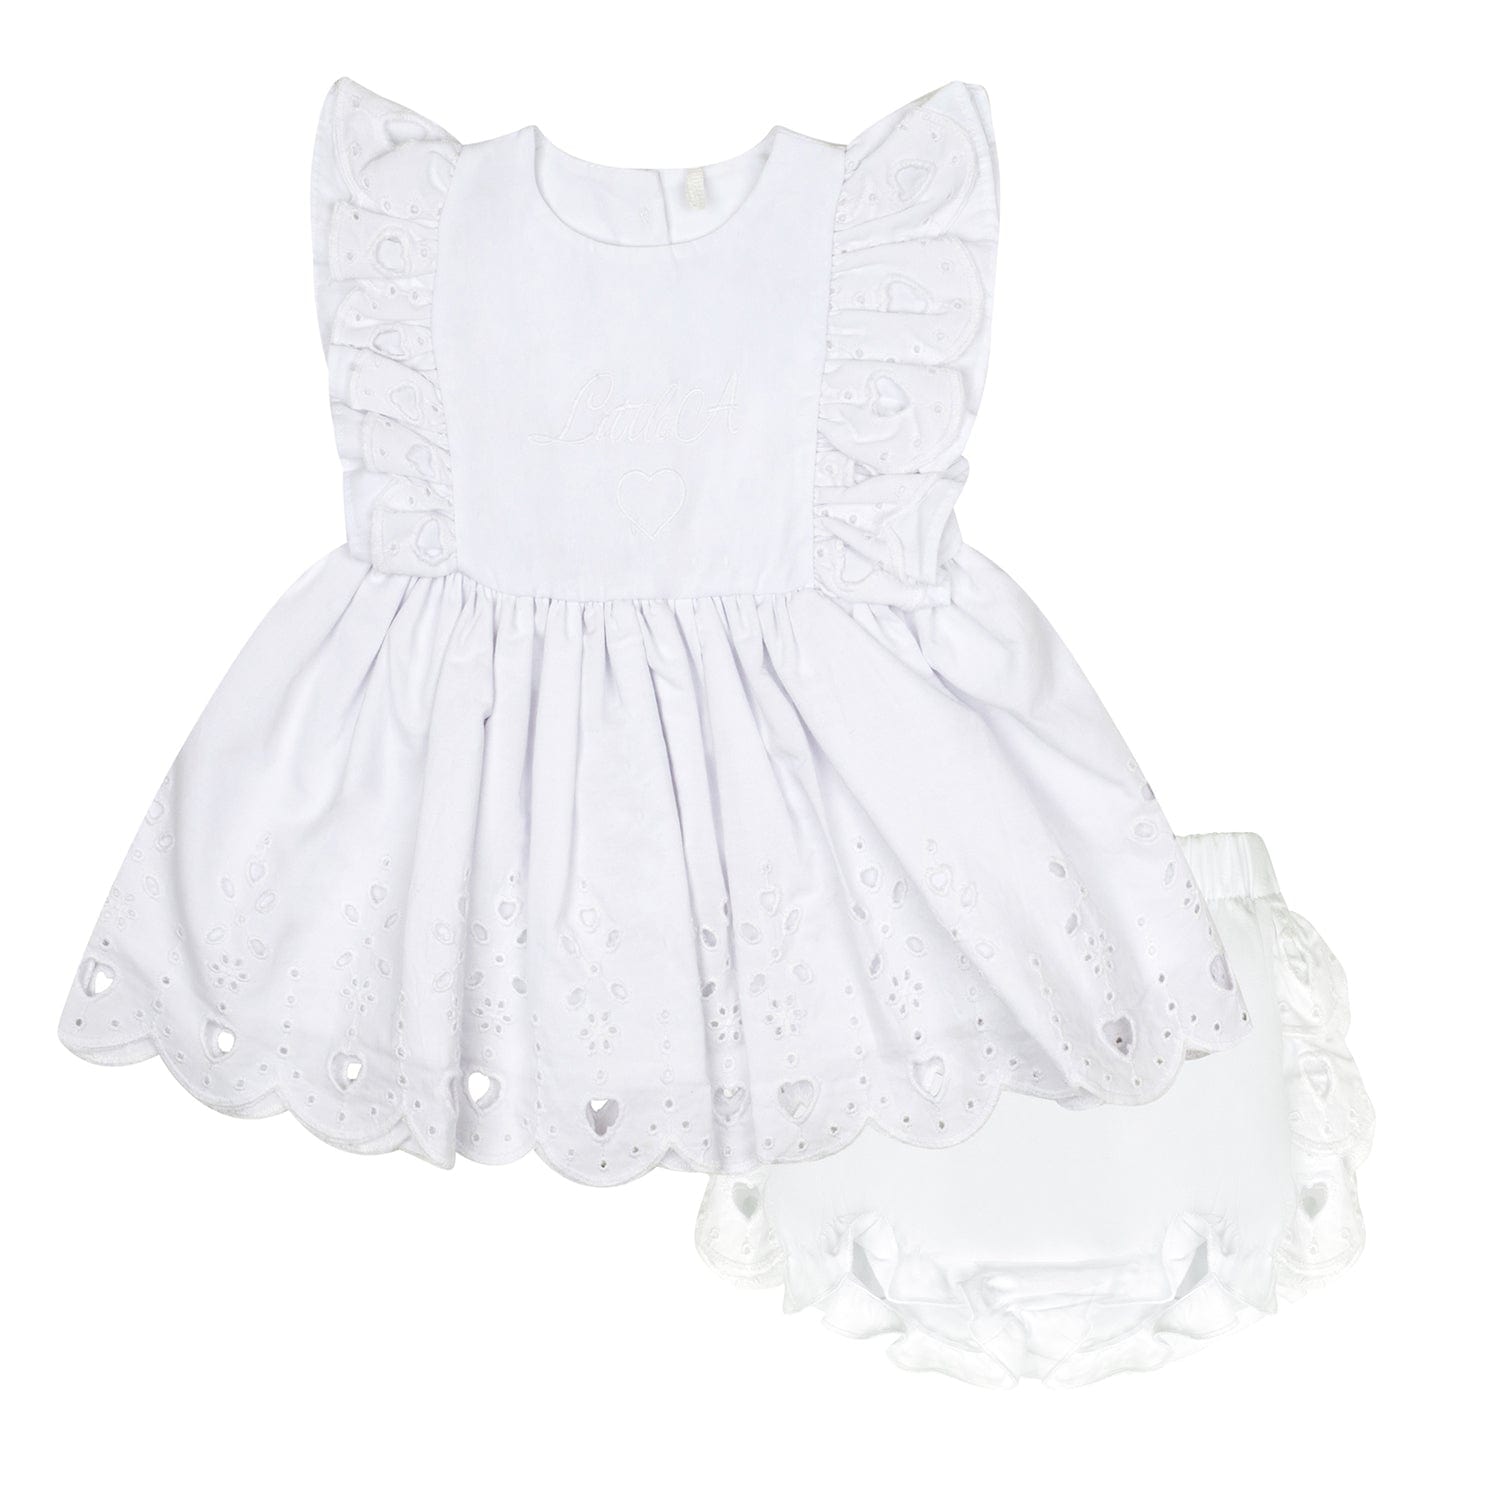 LITTLE A - Juniper Pastel Hearts Broderie Anglaise Dress - White